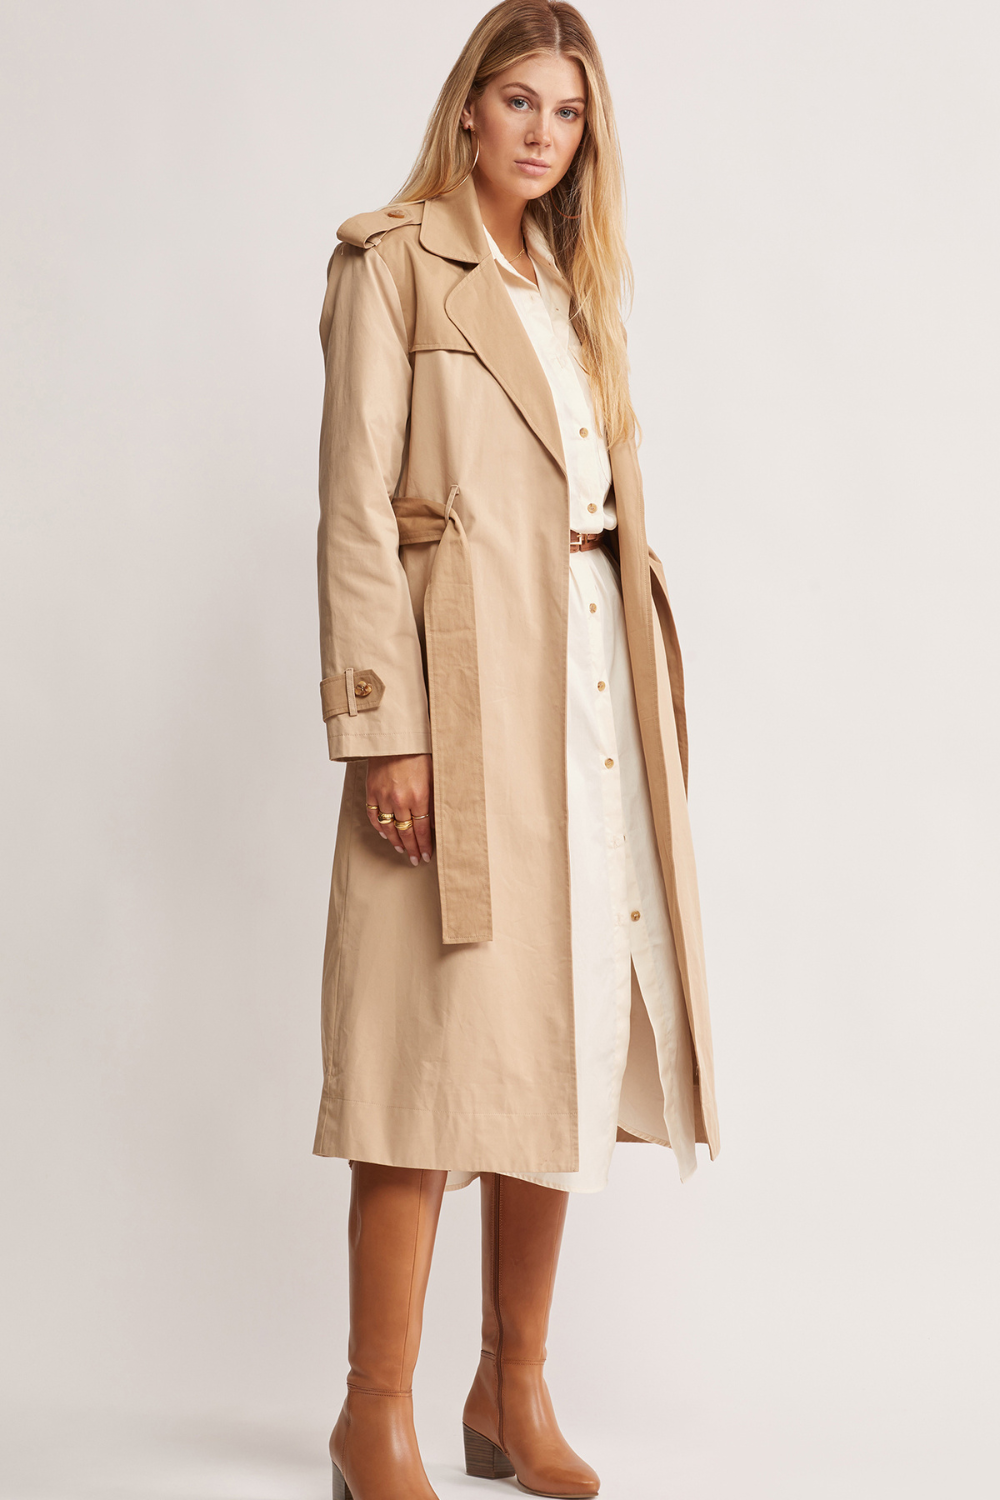 MOS The Label Intrepid Trench Coat Clay